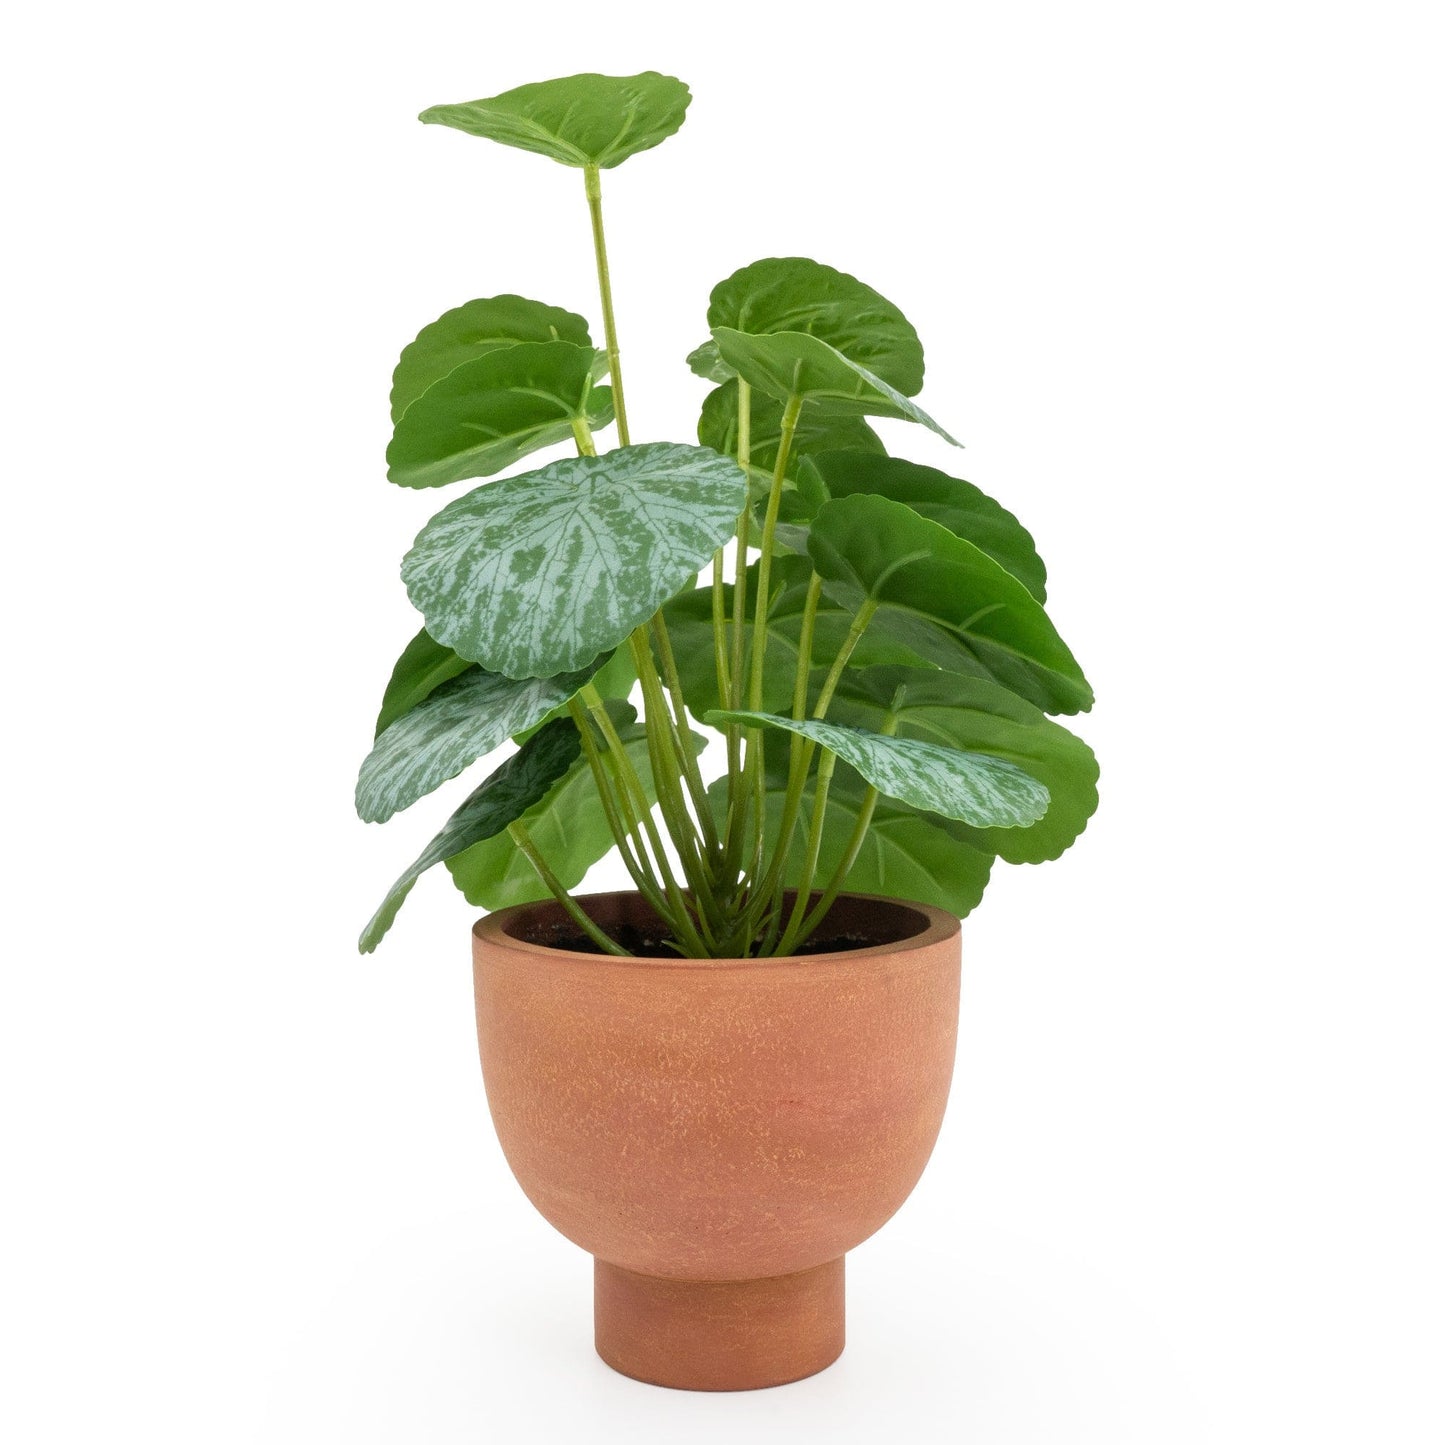 Chinese Money Plant in Pot